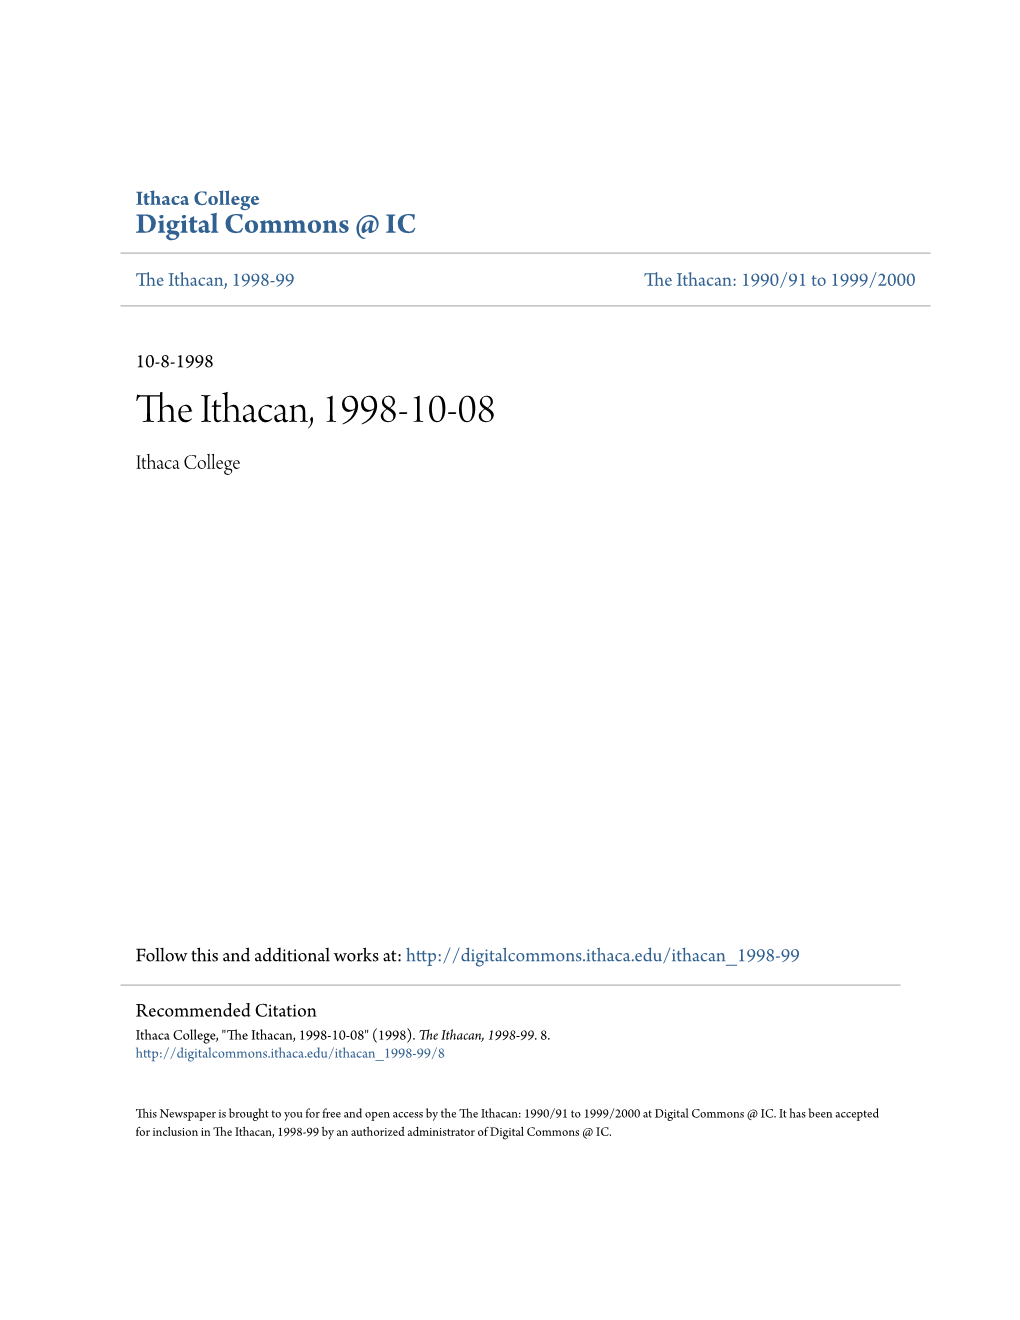 The Ithacan, 1998-10-08